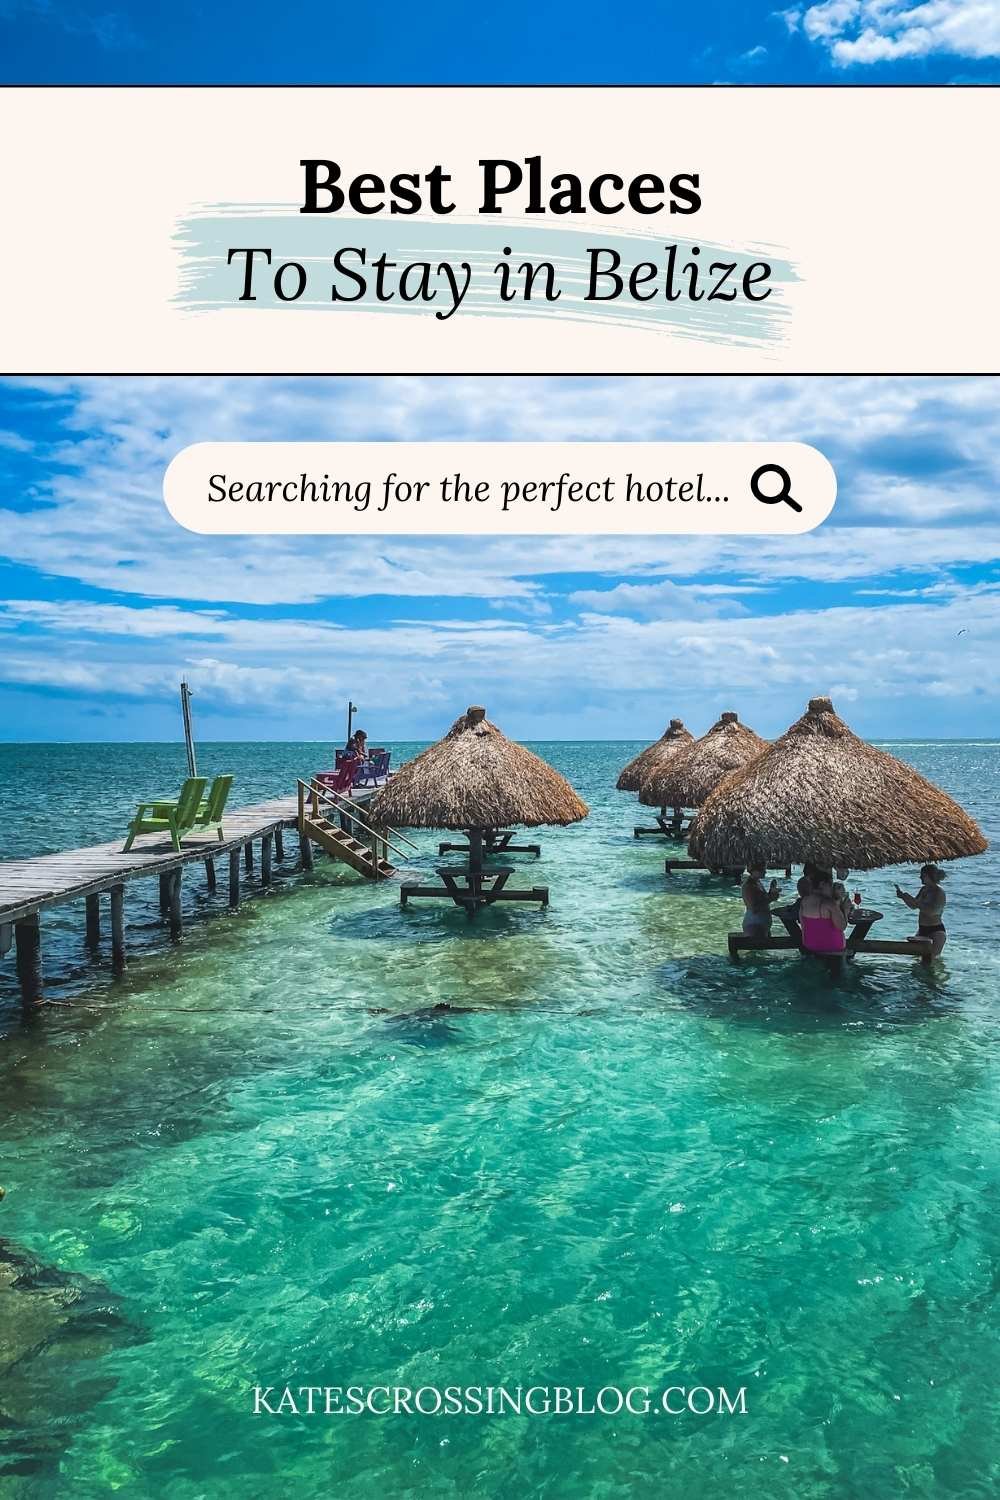 Pinterest pin for blog post Best Places to stay in Belize. The picture i used is of the cabanas out in the shallows of the turquoise water.